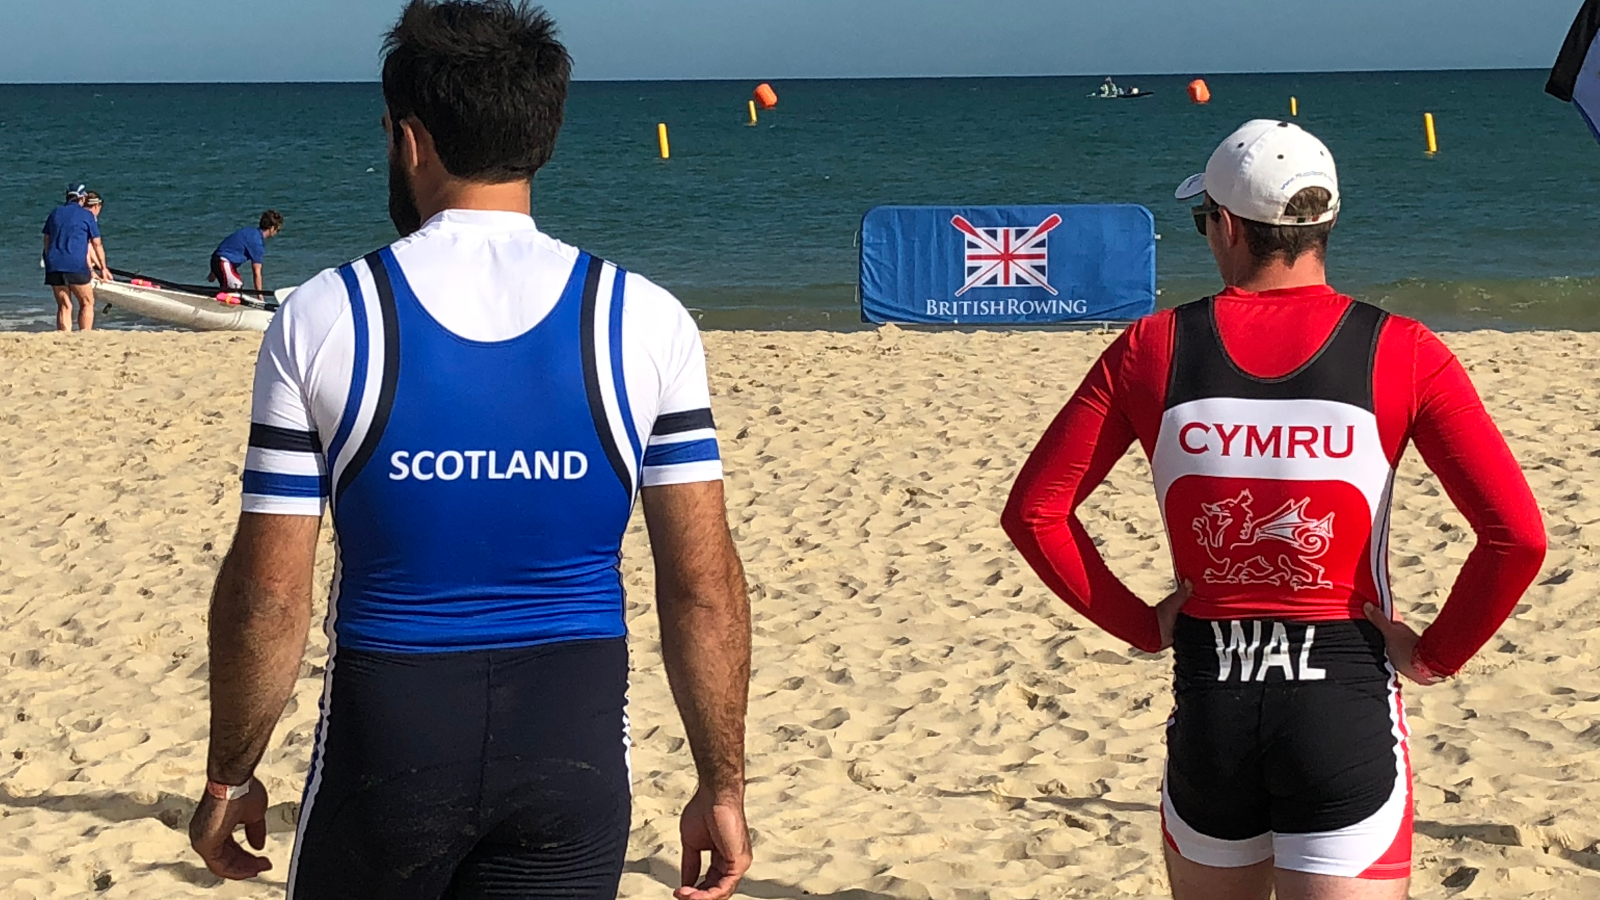 The 2018 Commonwealth Rowing Beach Sprints (c) British Rowing